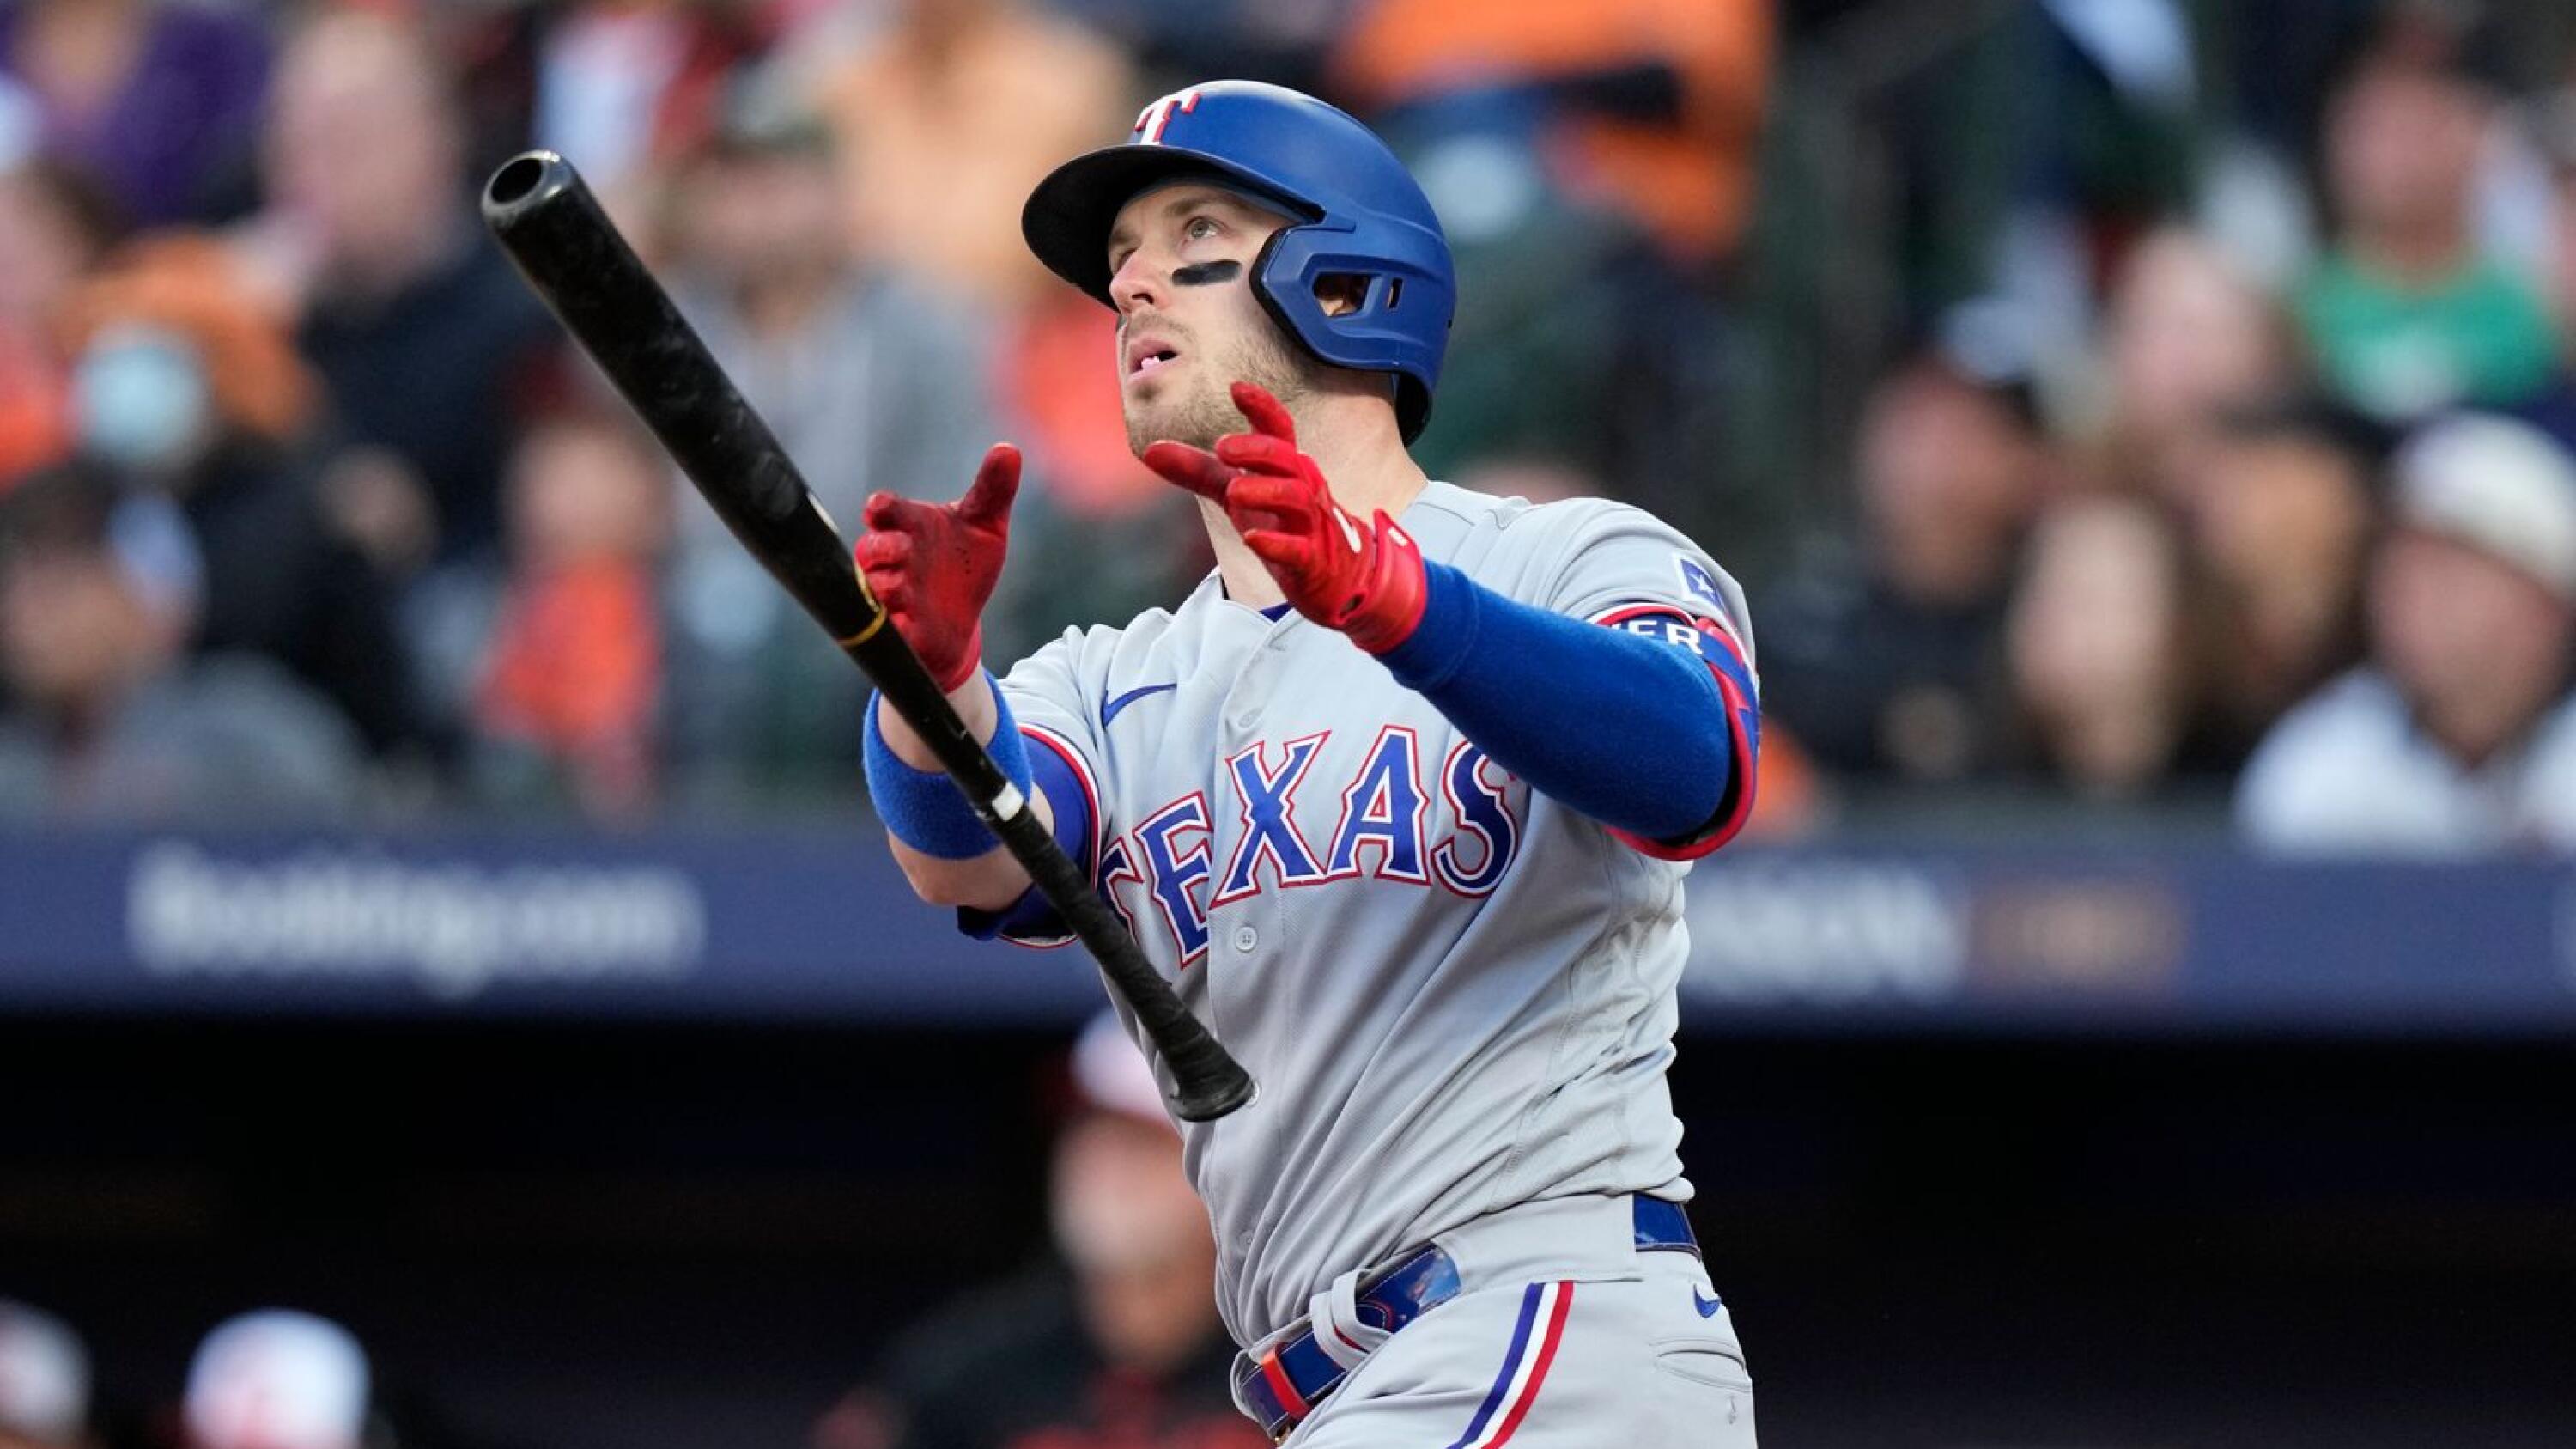 Bats come up big for Texas Rangers in series win in Los Angeles